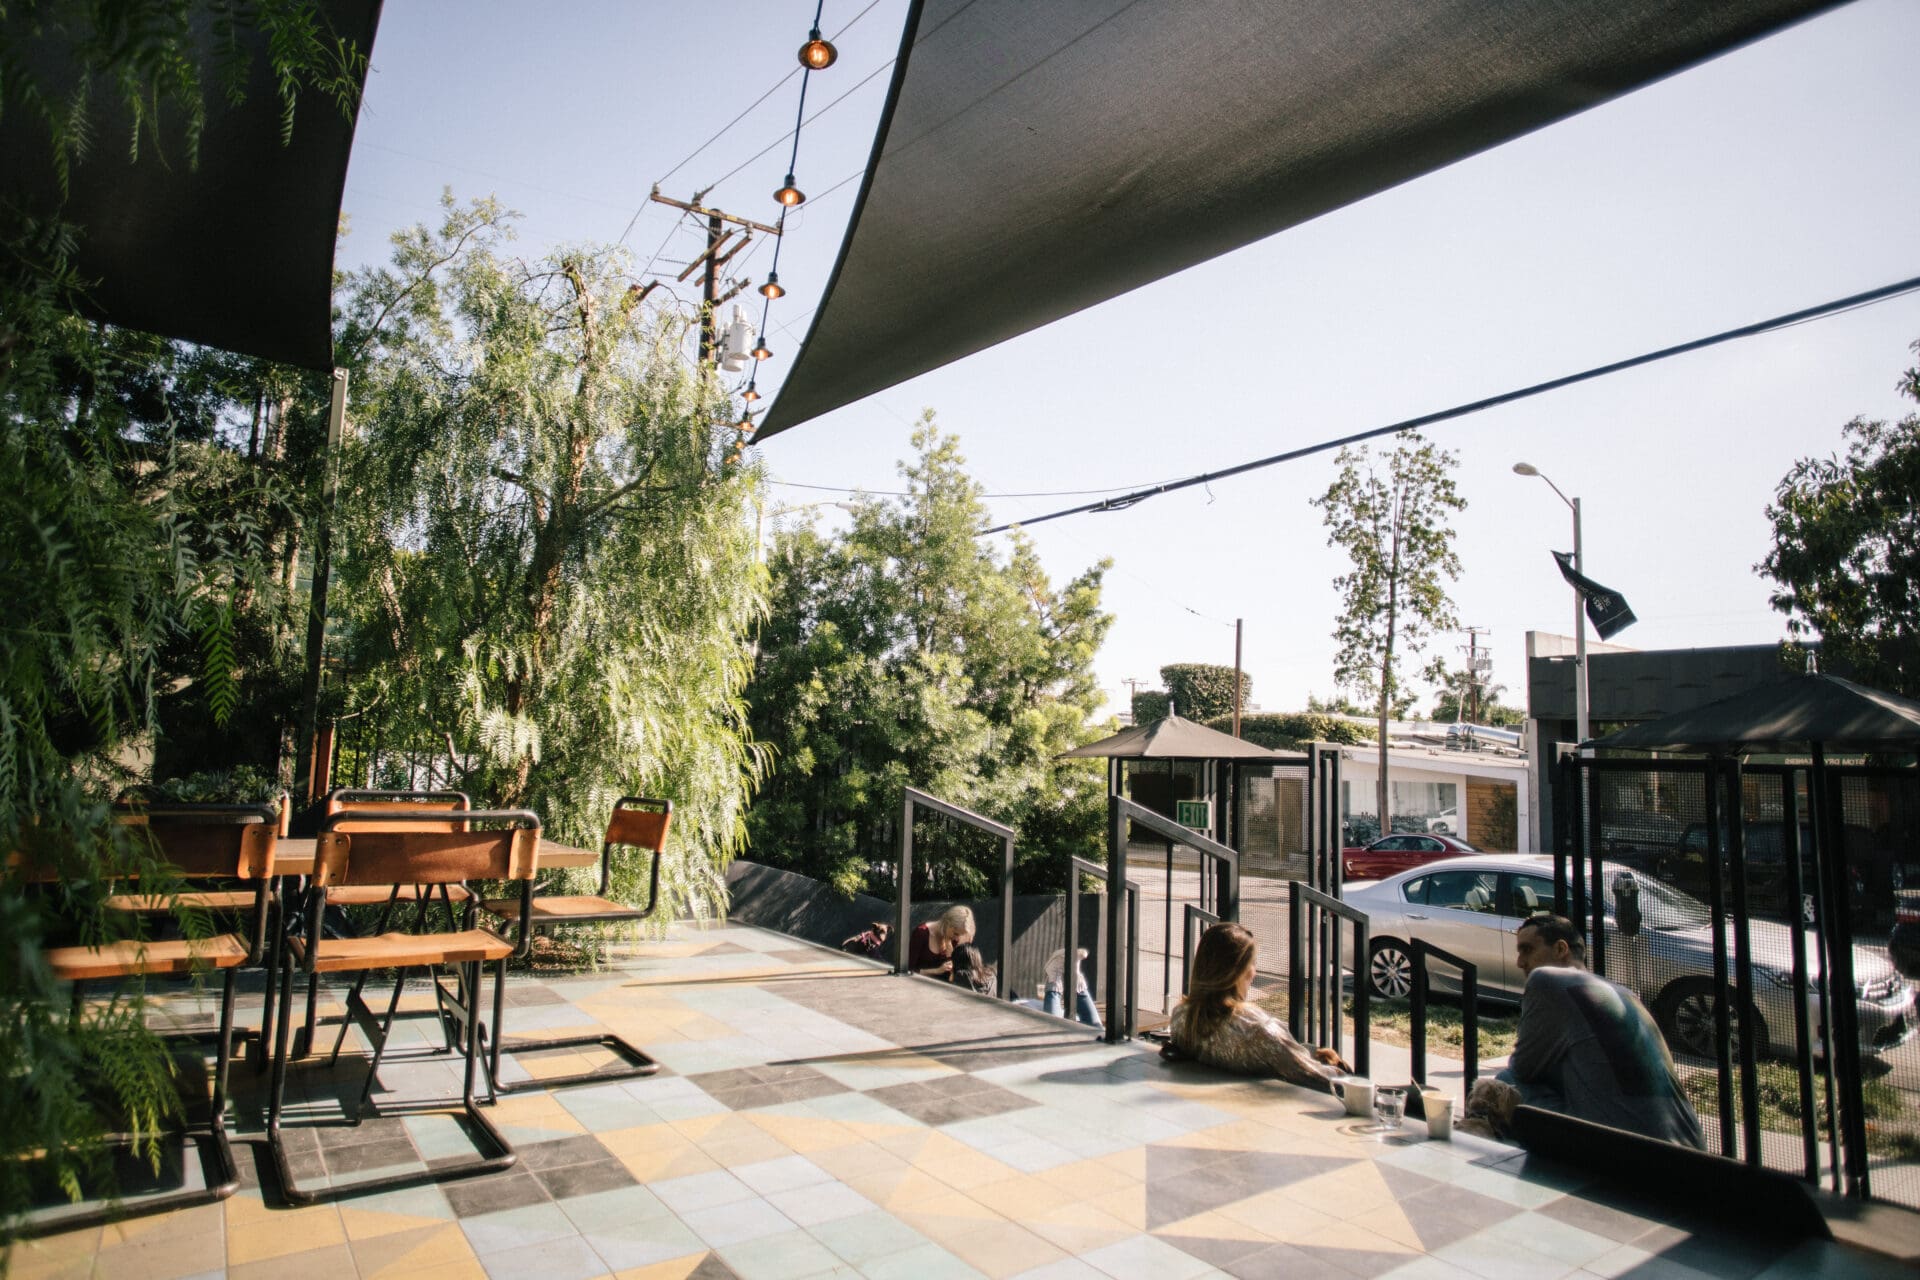 LA's best coffee shops | The terrace outside Verve's Melrose site, with a stone-tiled floor, wooden furniture and plenty of plants underneath an awning in the LA sunshine